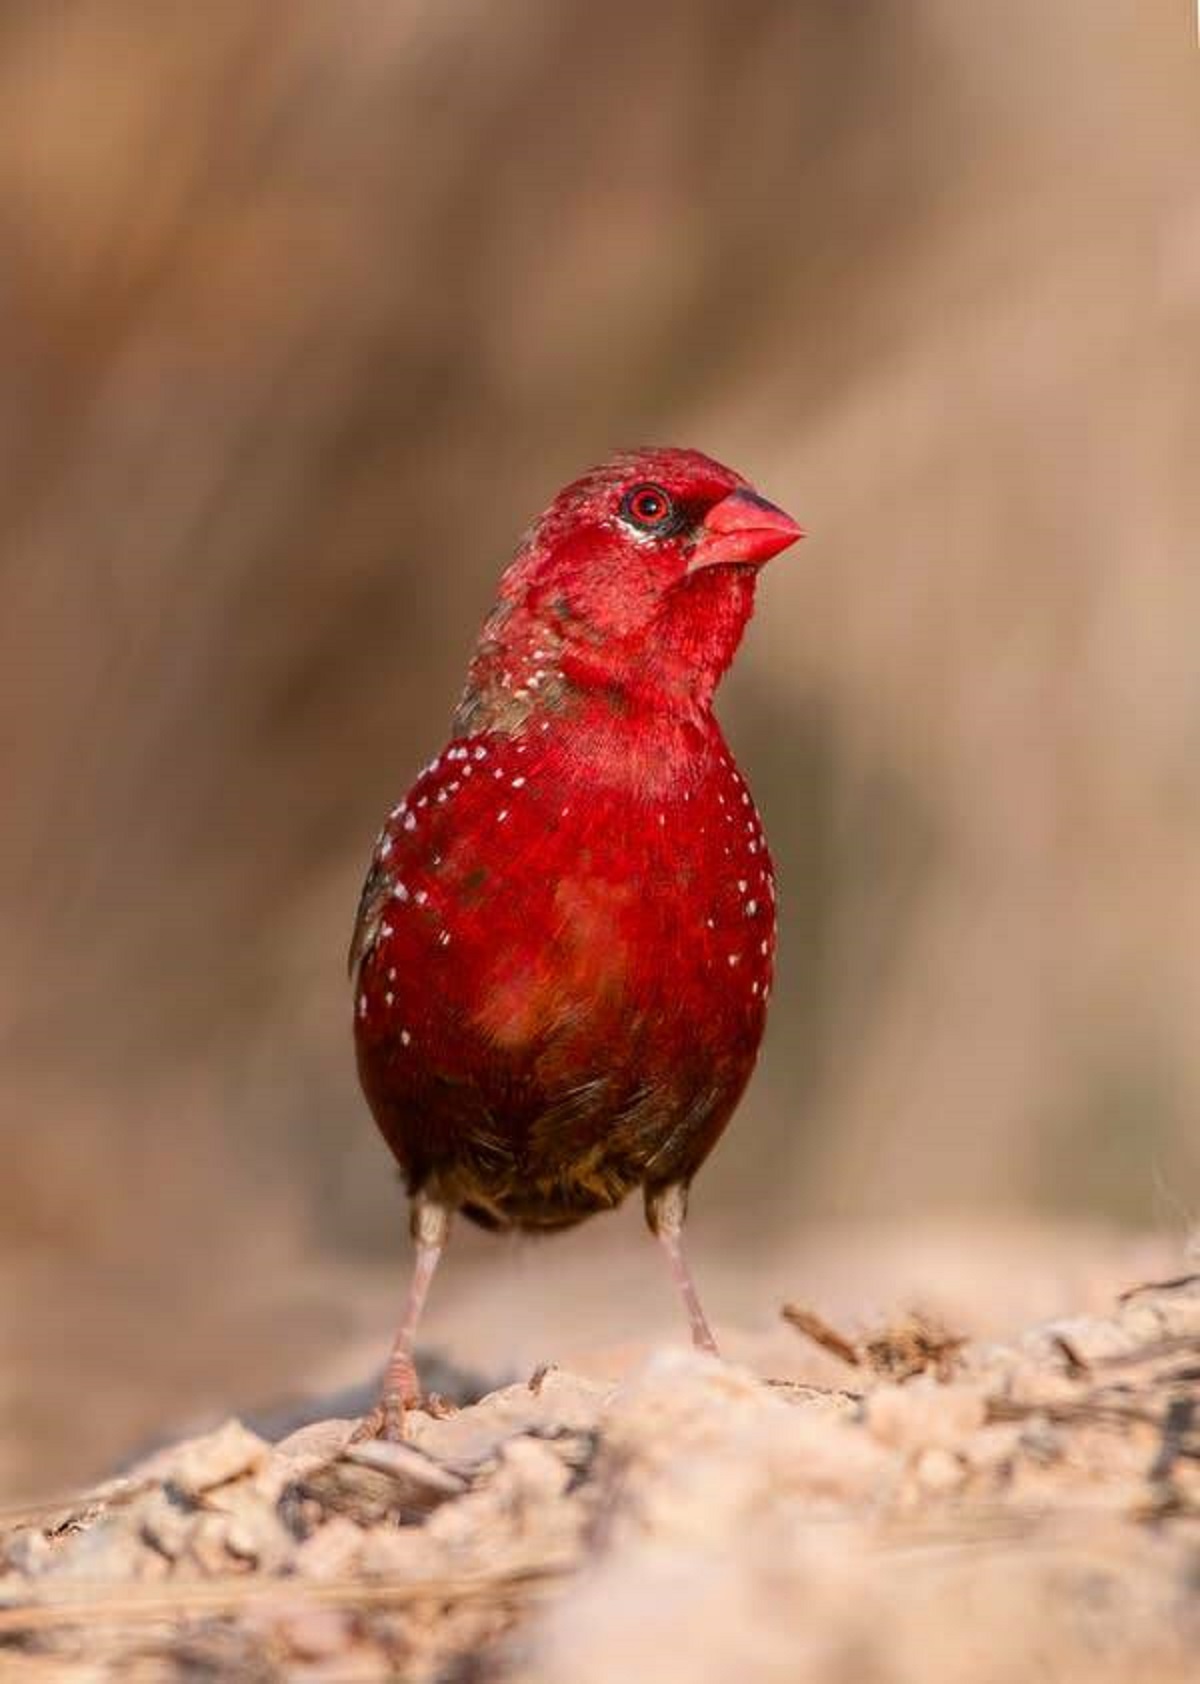 There's a bird that looks like a strawberry that's called, well, the strawberry finch: